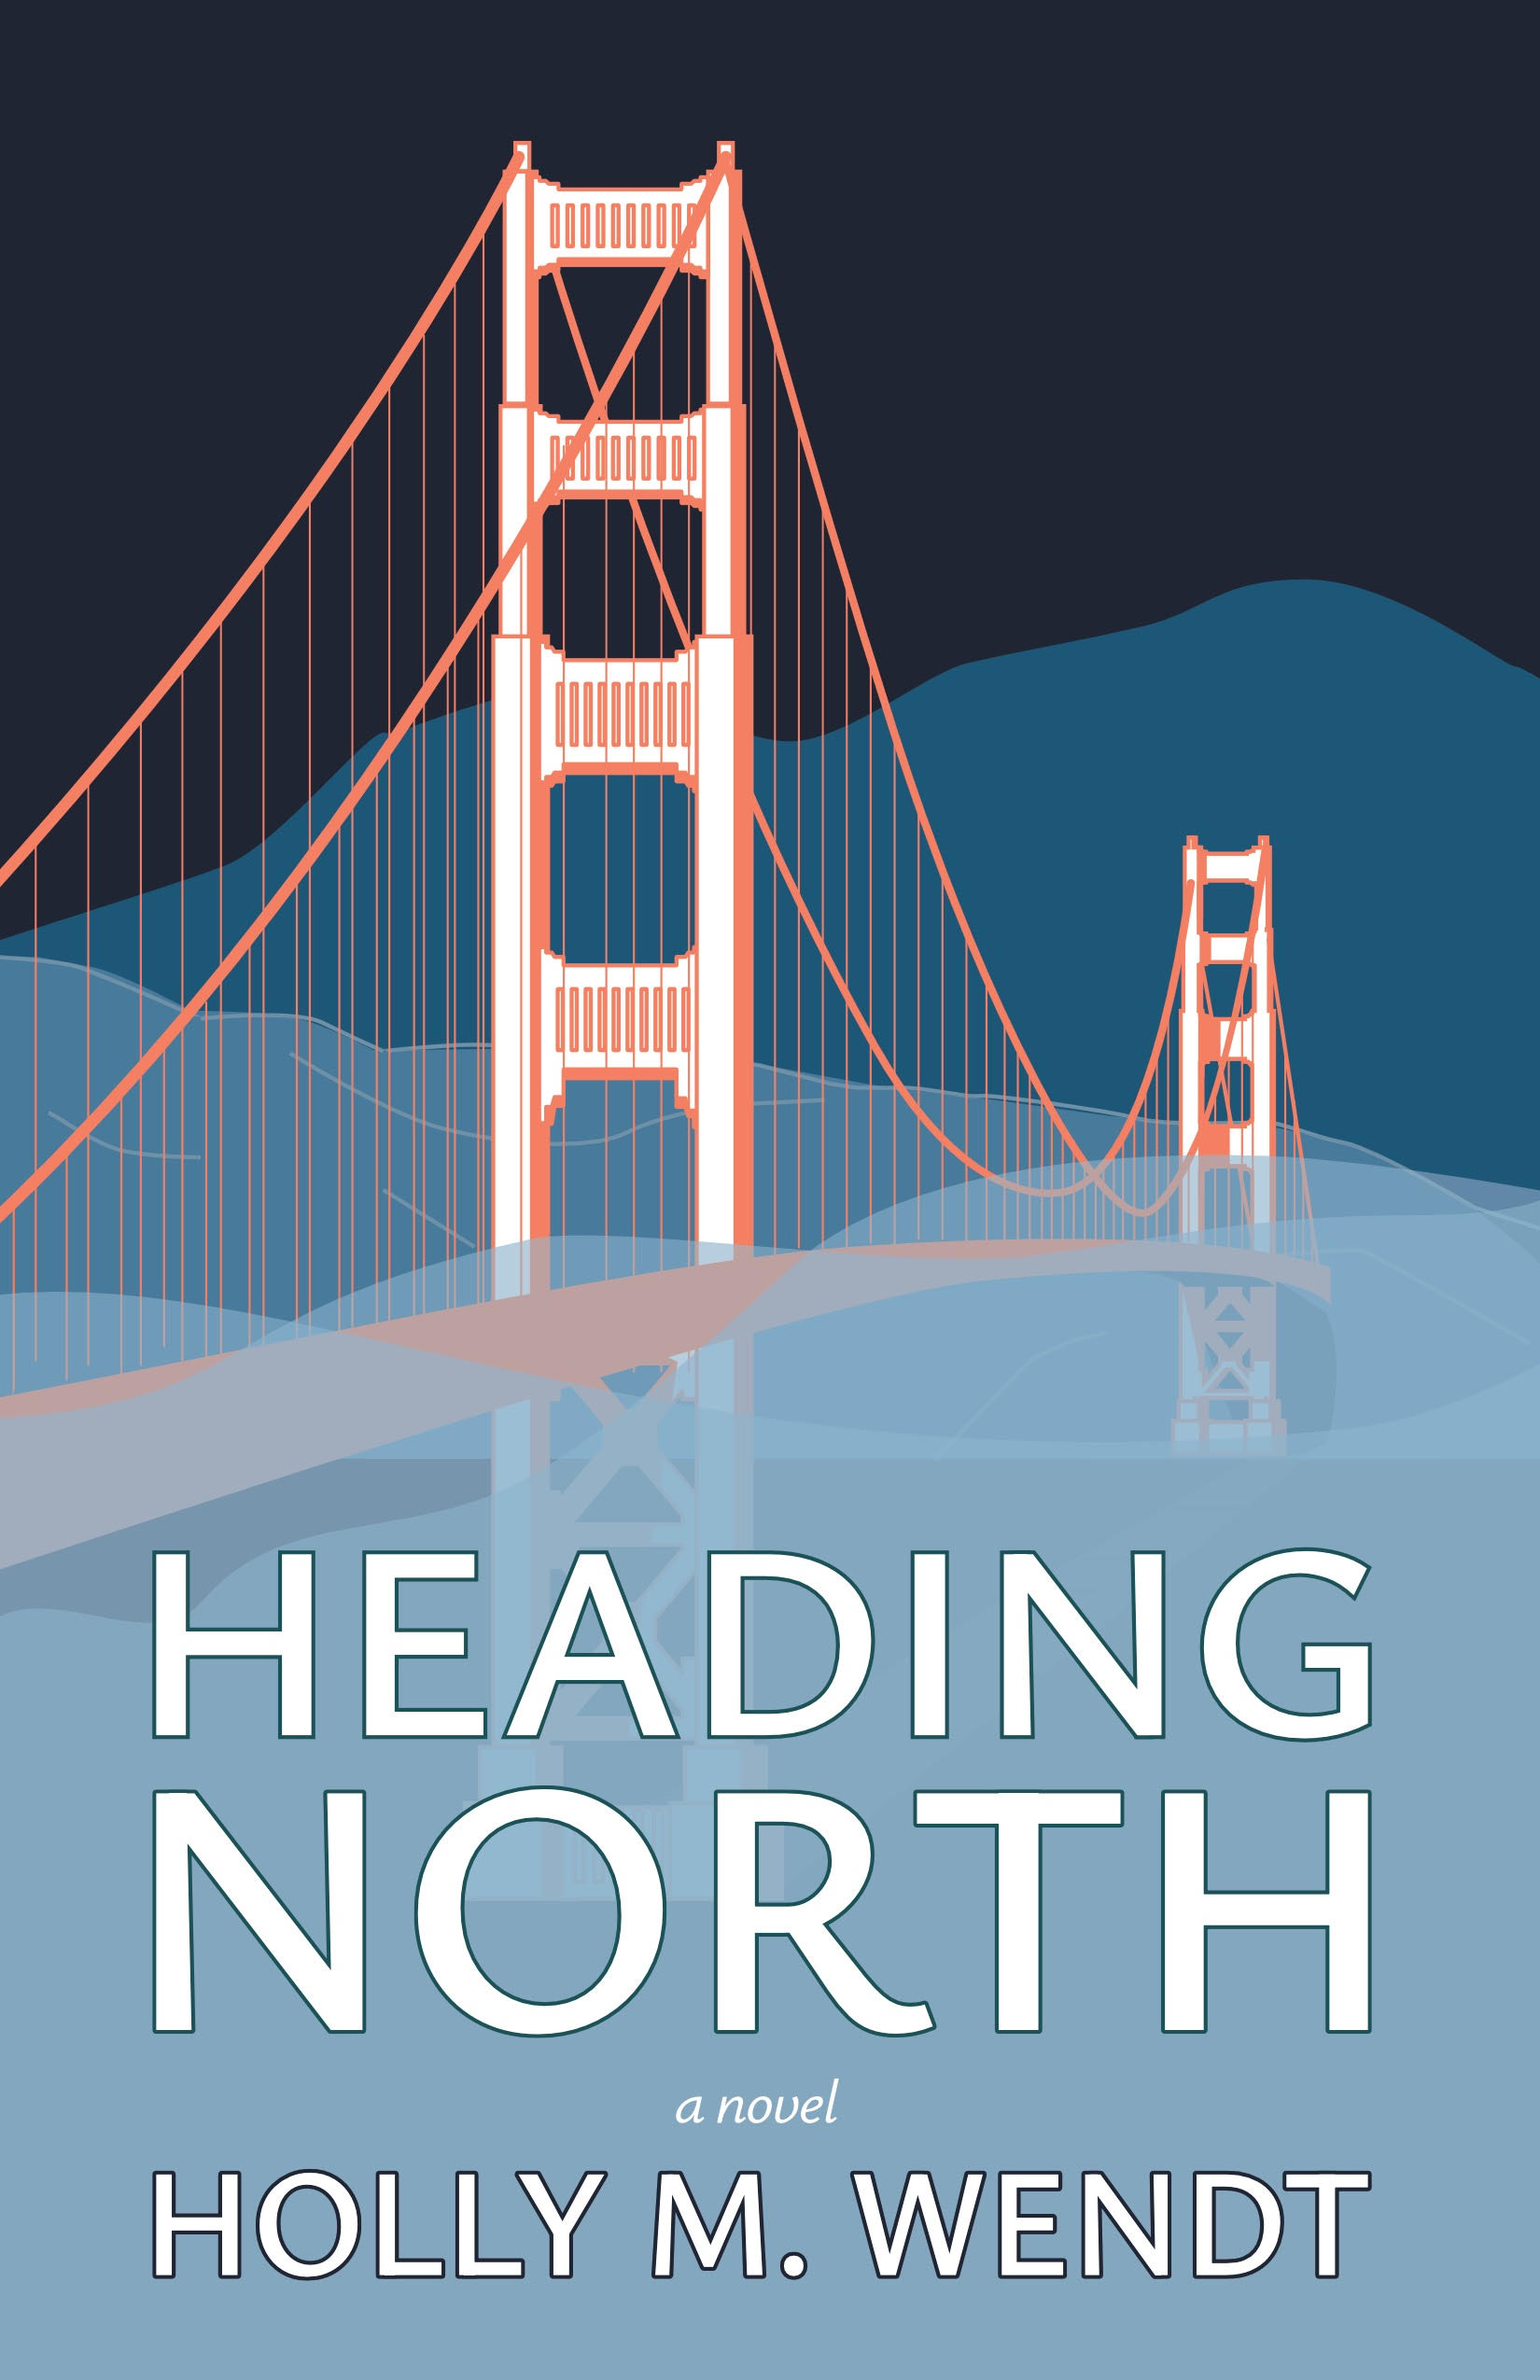 The cover of Holly M. Wendt's novel Heading North, featuring a soft orange silhouette of the Golden Gate Bridge against a gradation of storm-blue to suggest hills, fog, and waves.